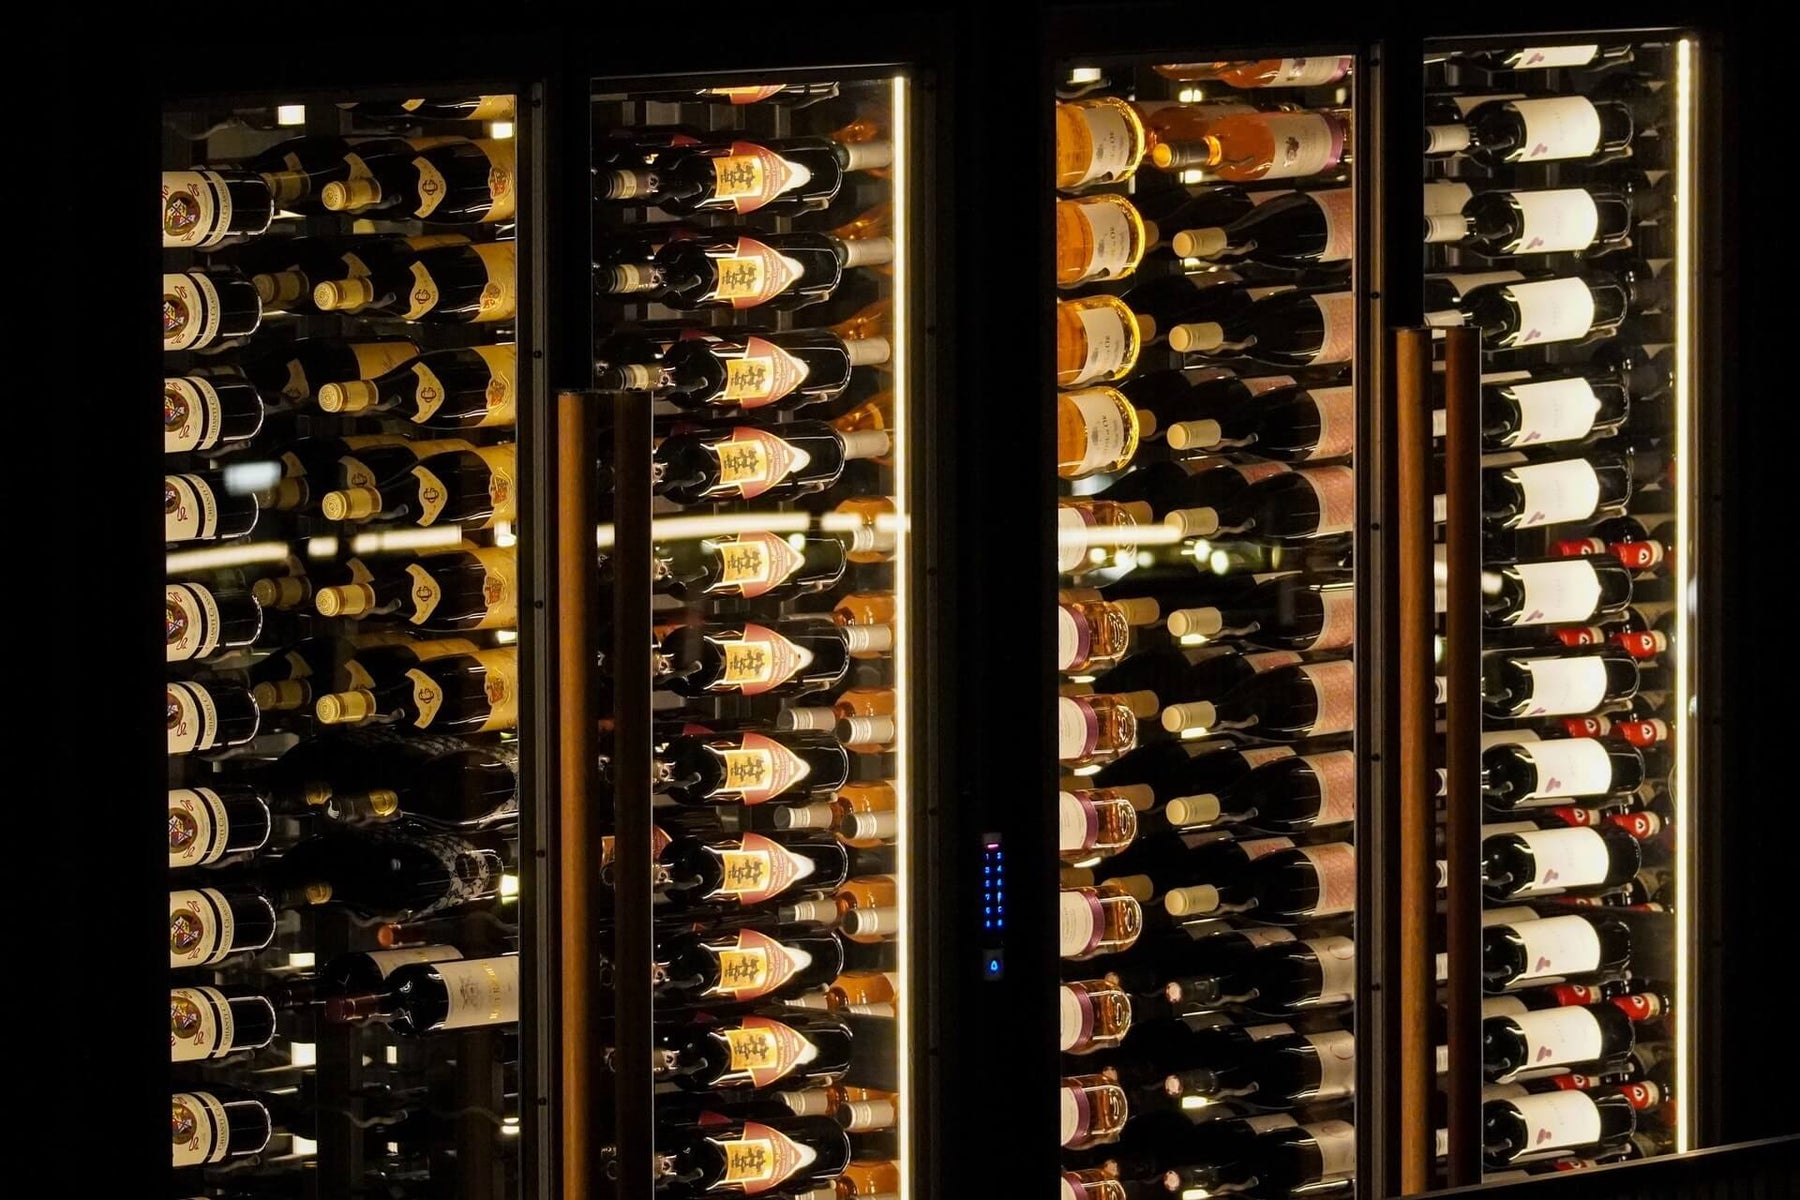 Some Considerations and Expert Advice For Choosing a Wine Cooler